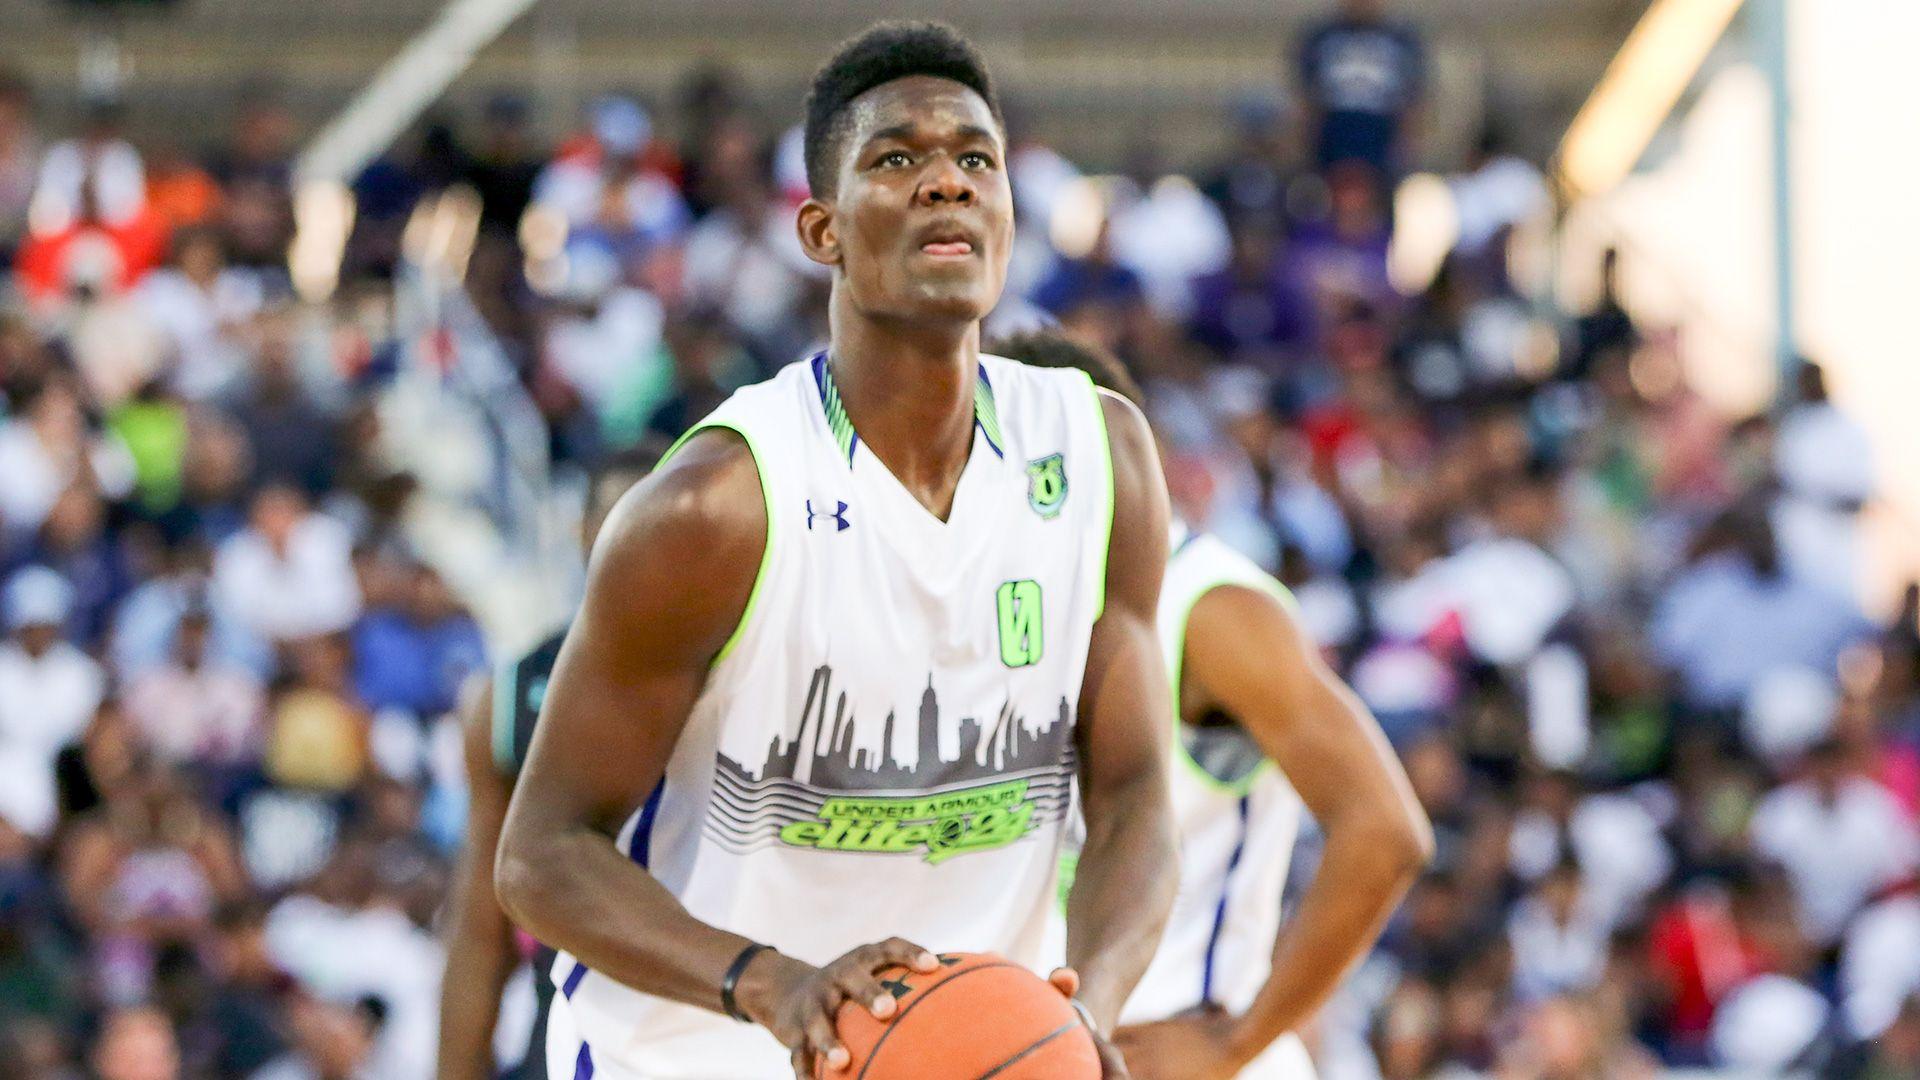 DeAndre Ayton shocks recruiting world by becoming first No. 1